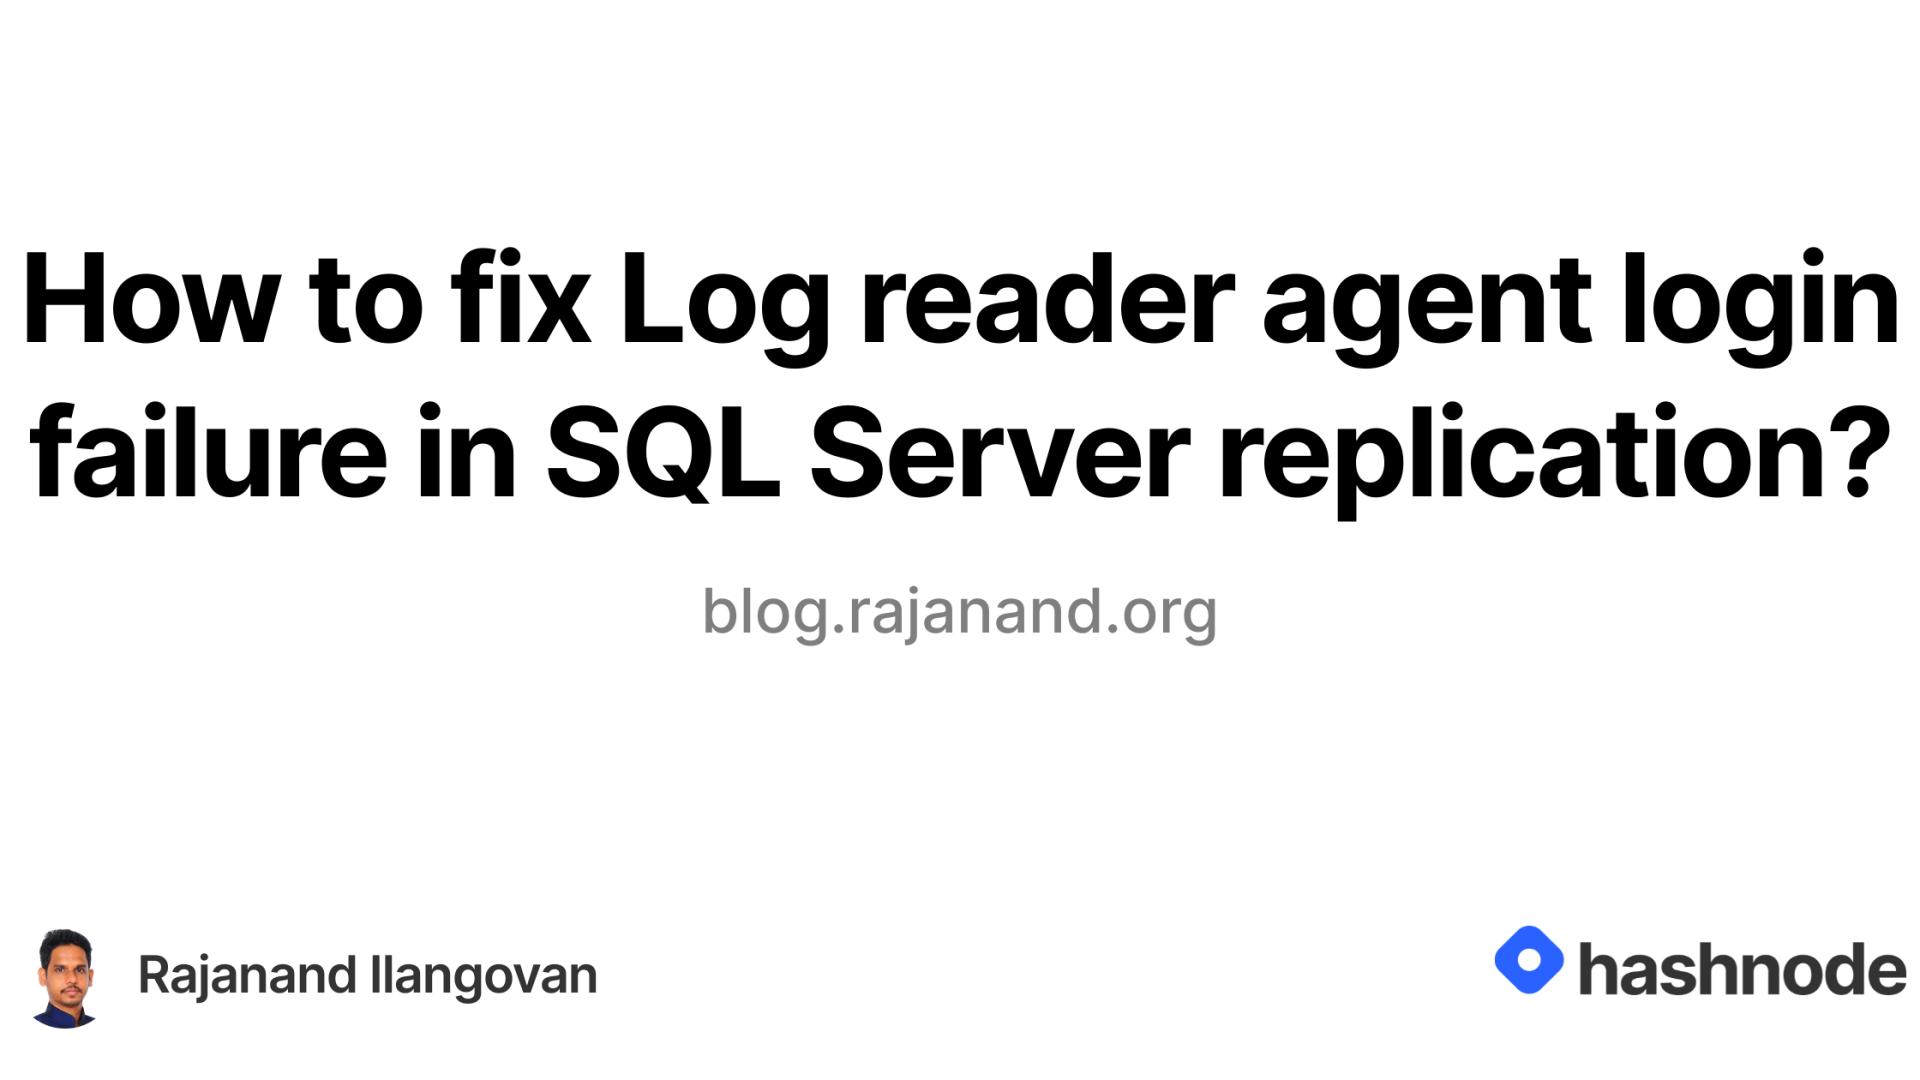 How to fix Log reader agent login failure in SQL Server replication?